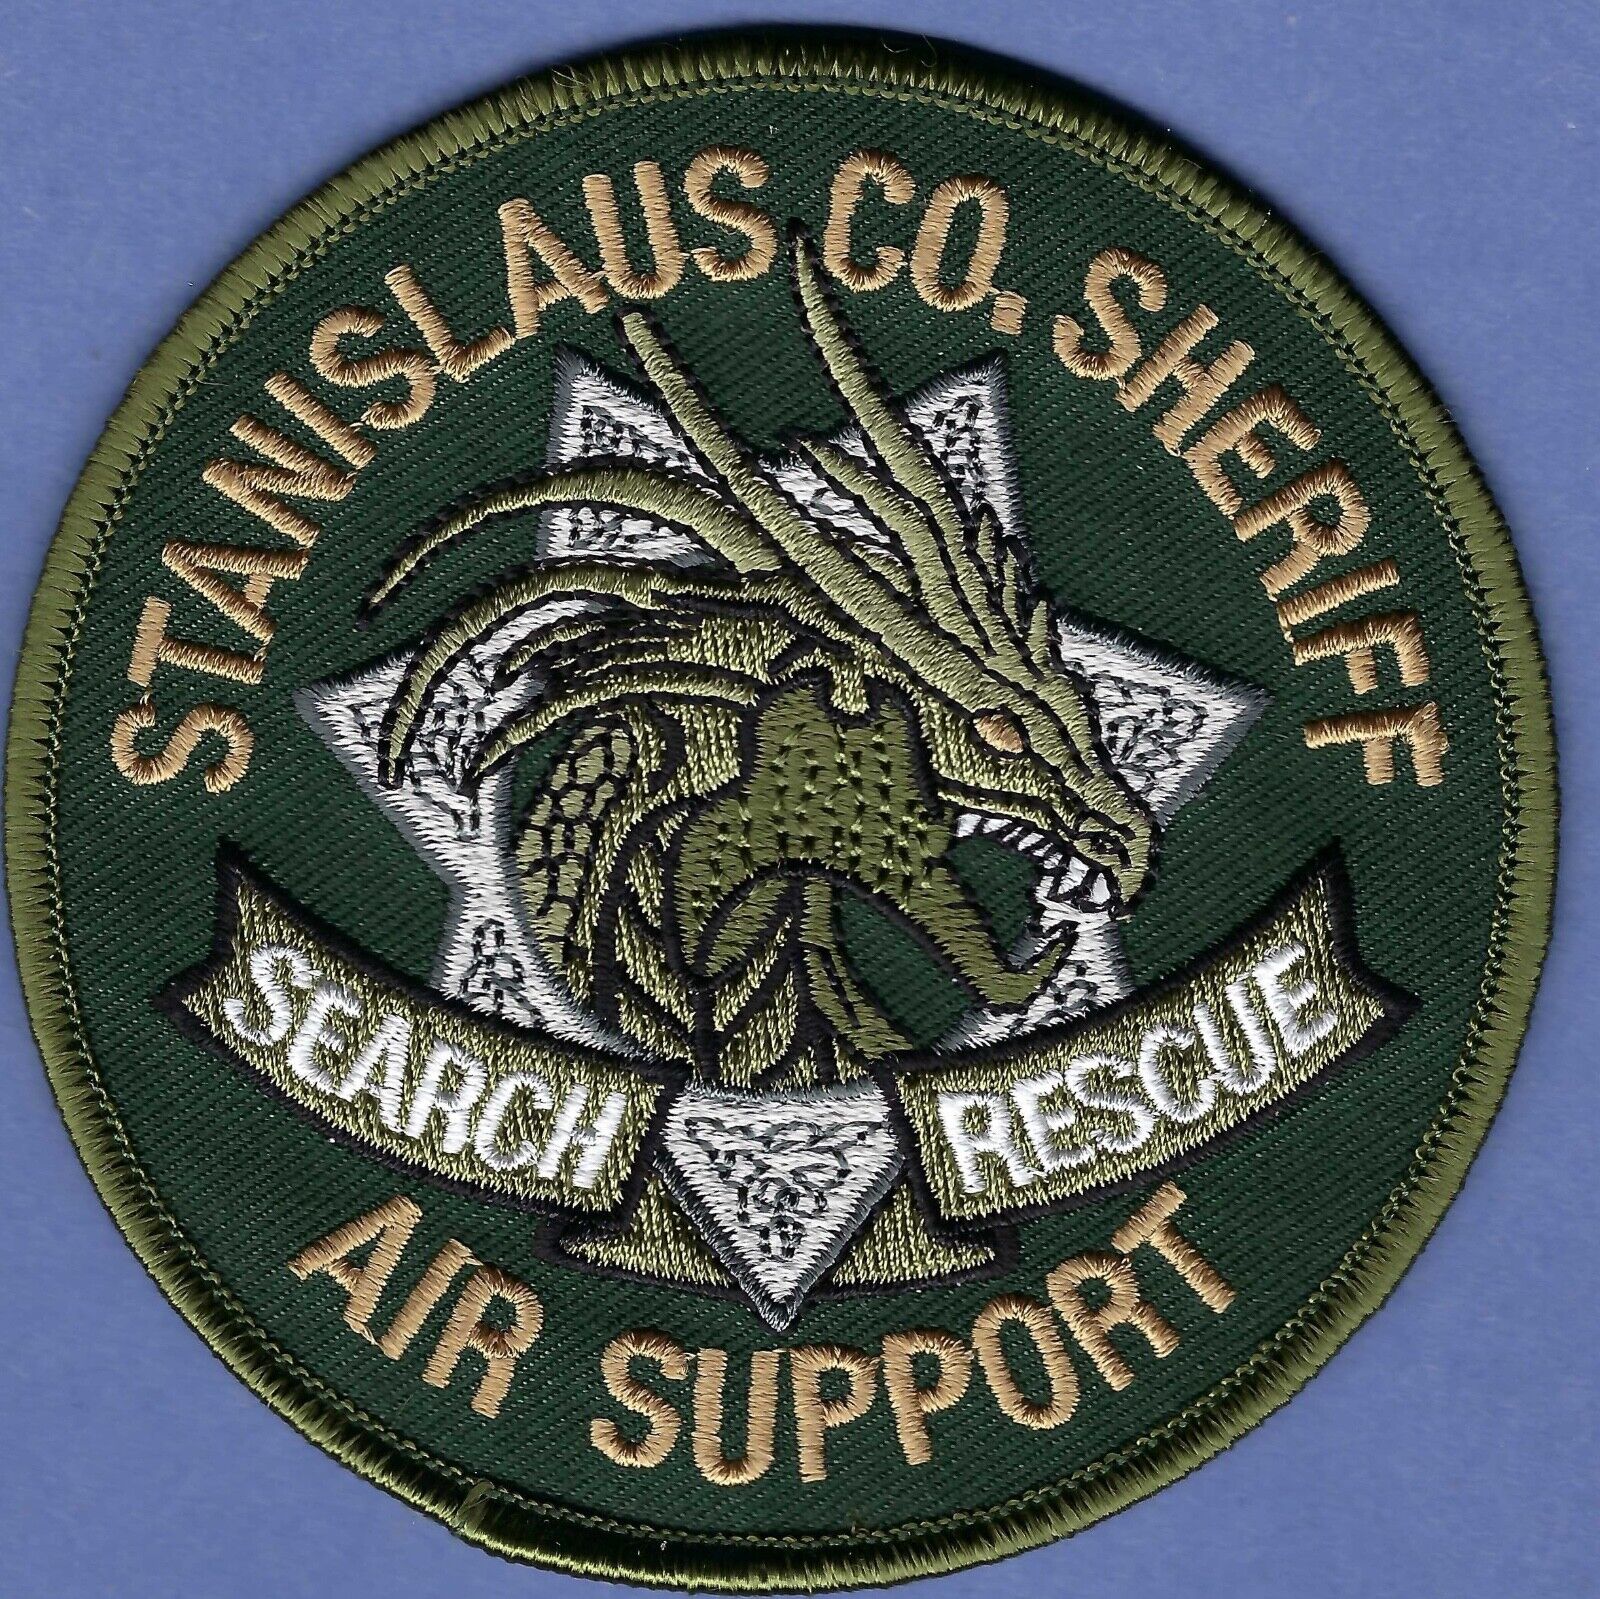 STANISLAUS COUNTY CALIFORNIA AIR SUPPORT SEARCH & RESCUE SHOULDER PATCH